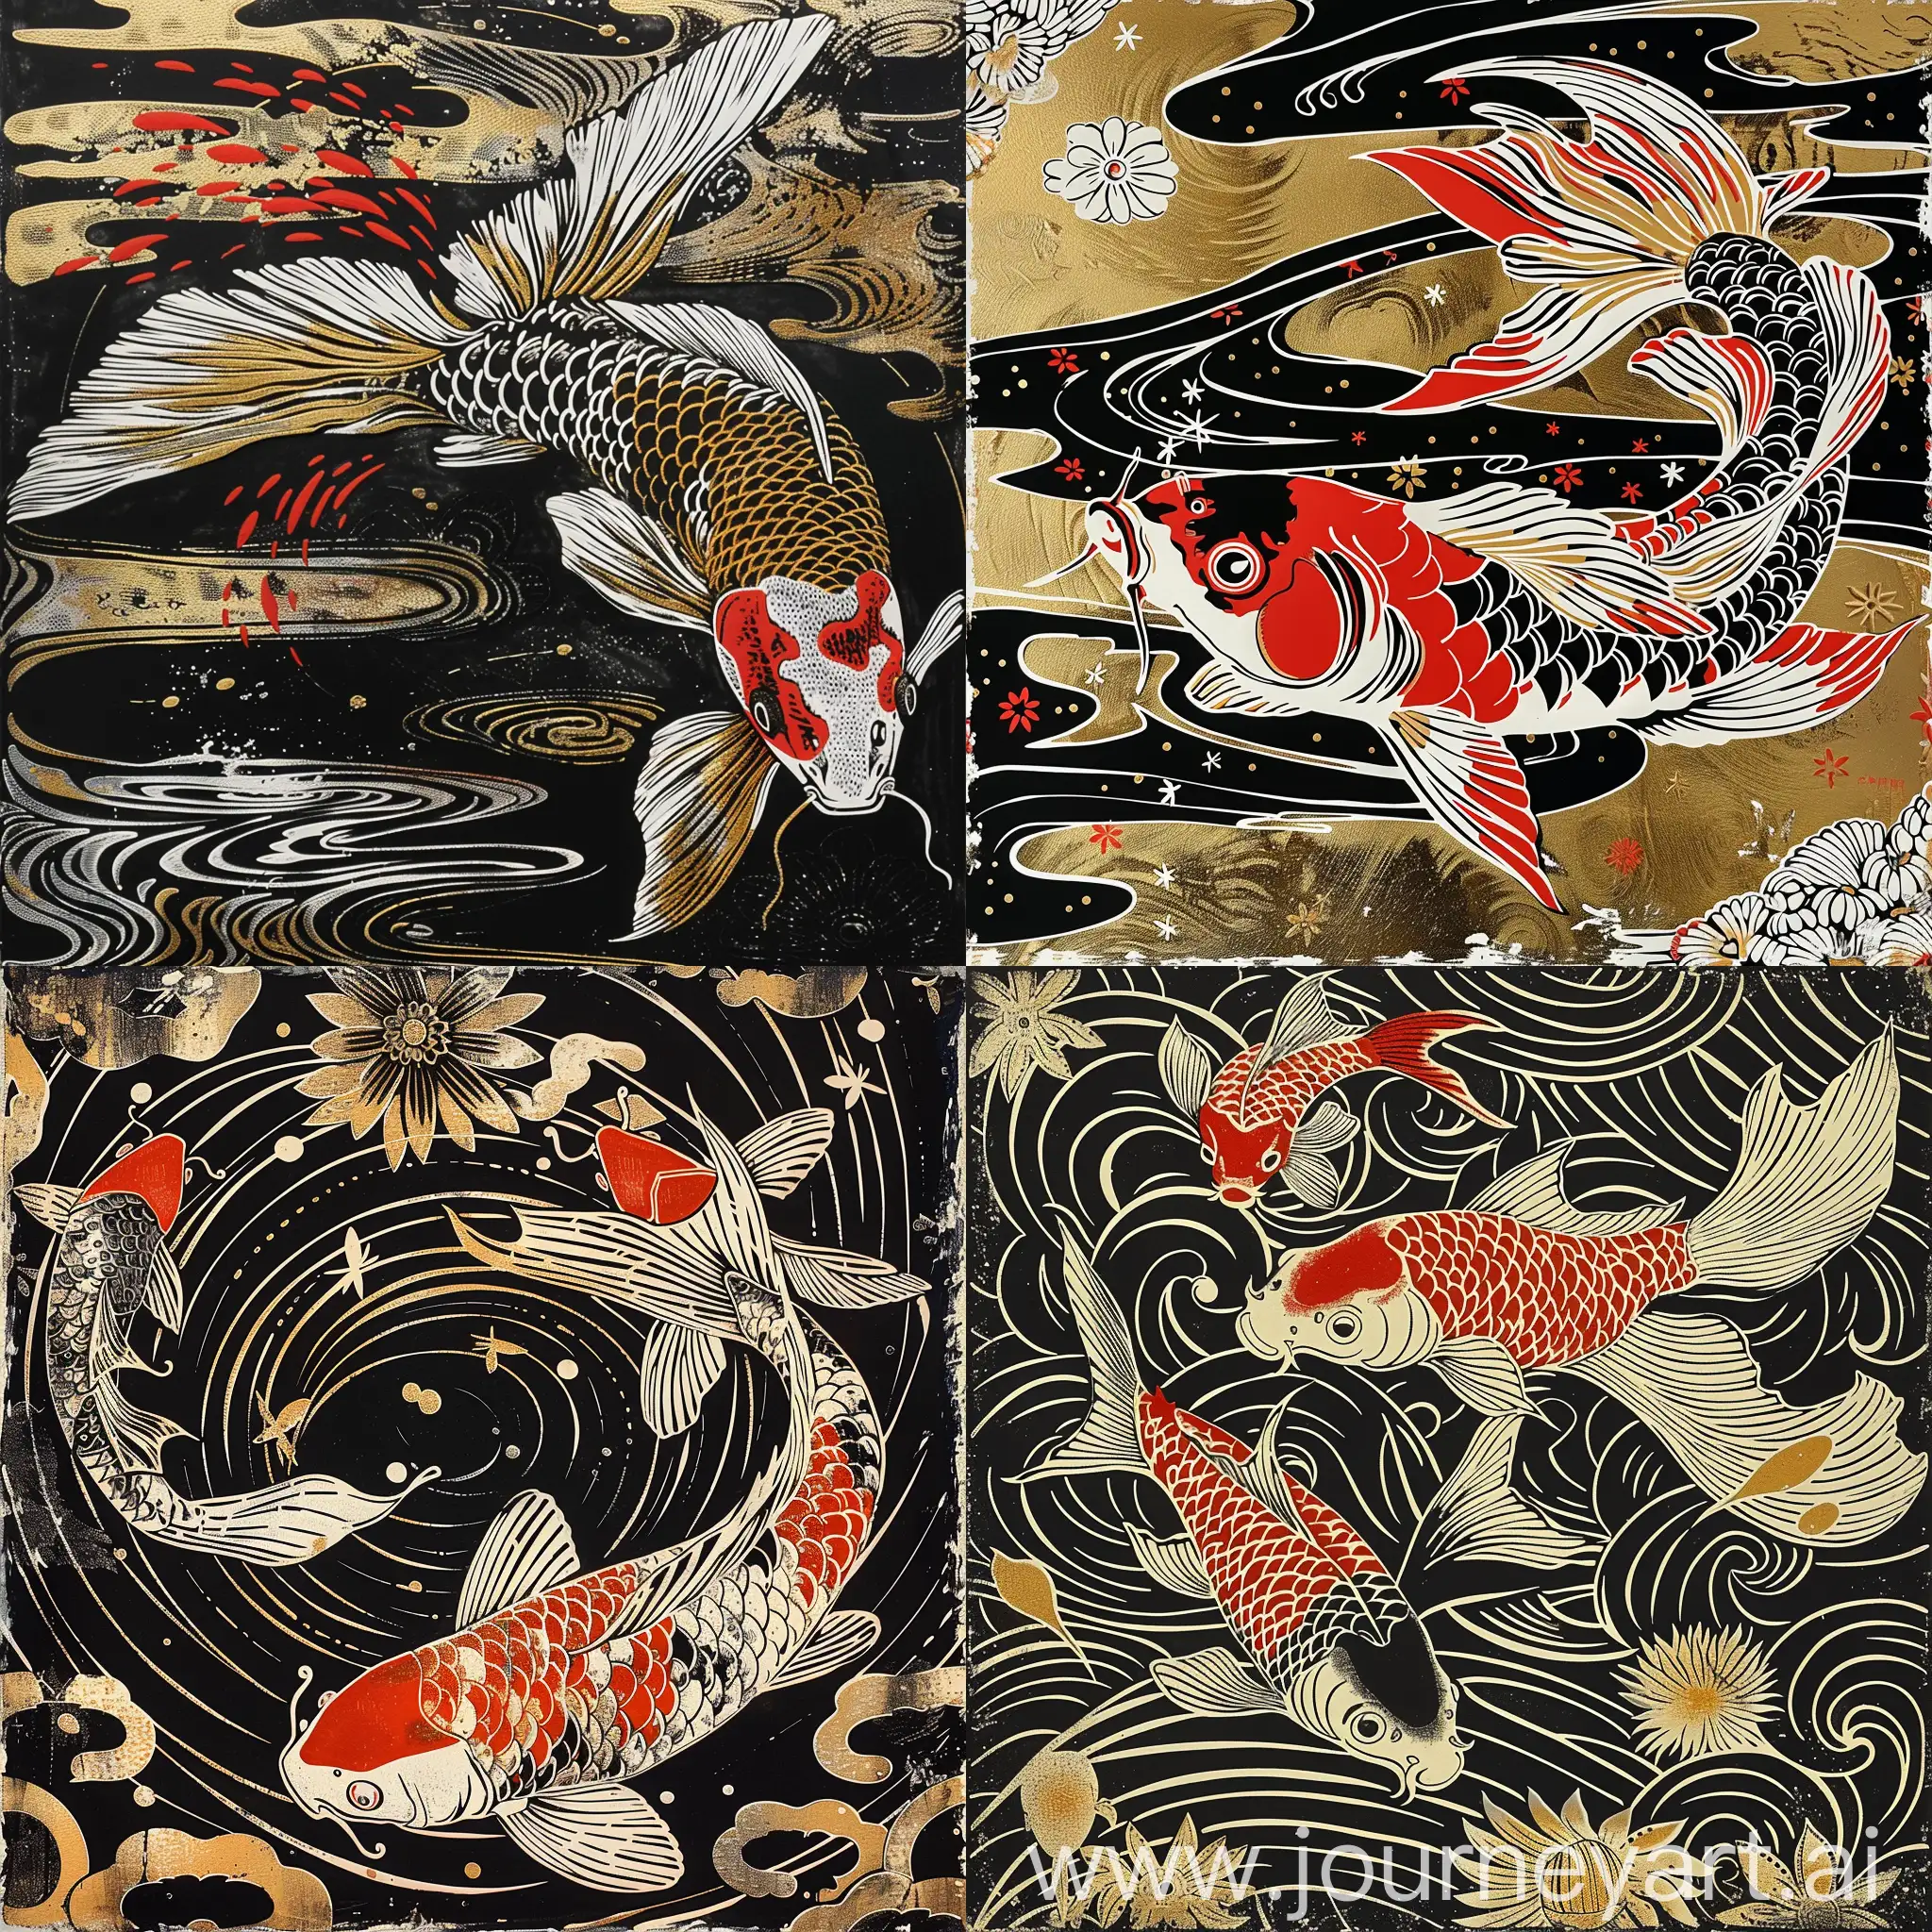 Japanese-Butterfly-Koi-Linocut-Print-with-Ornate-Patterns-and-Fine-Line-Textures